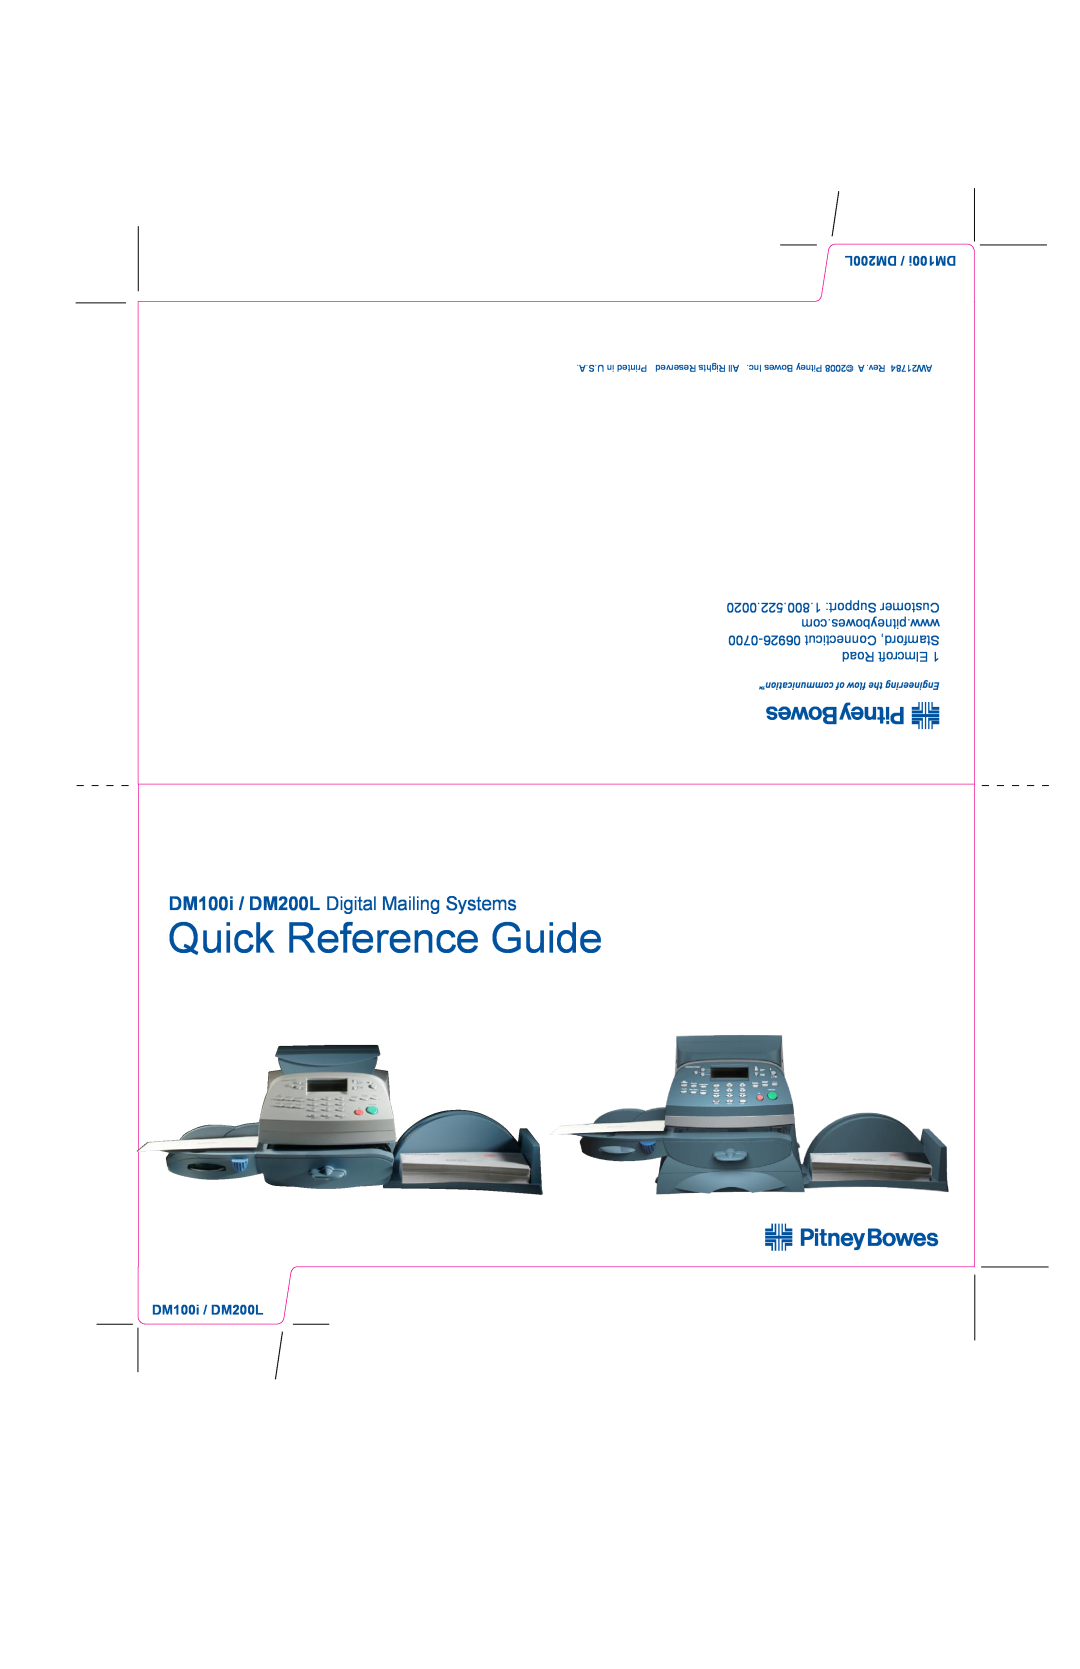 Pitney Bowes DM100i manual Support Customer com.pitneybowes.www, Connecticut Stamford Road Elmcroft, Quick Reference Guide 